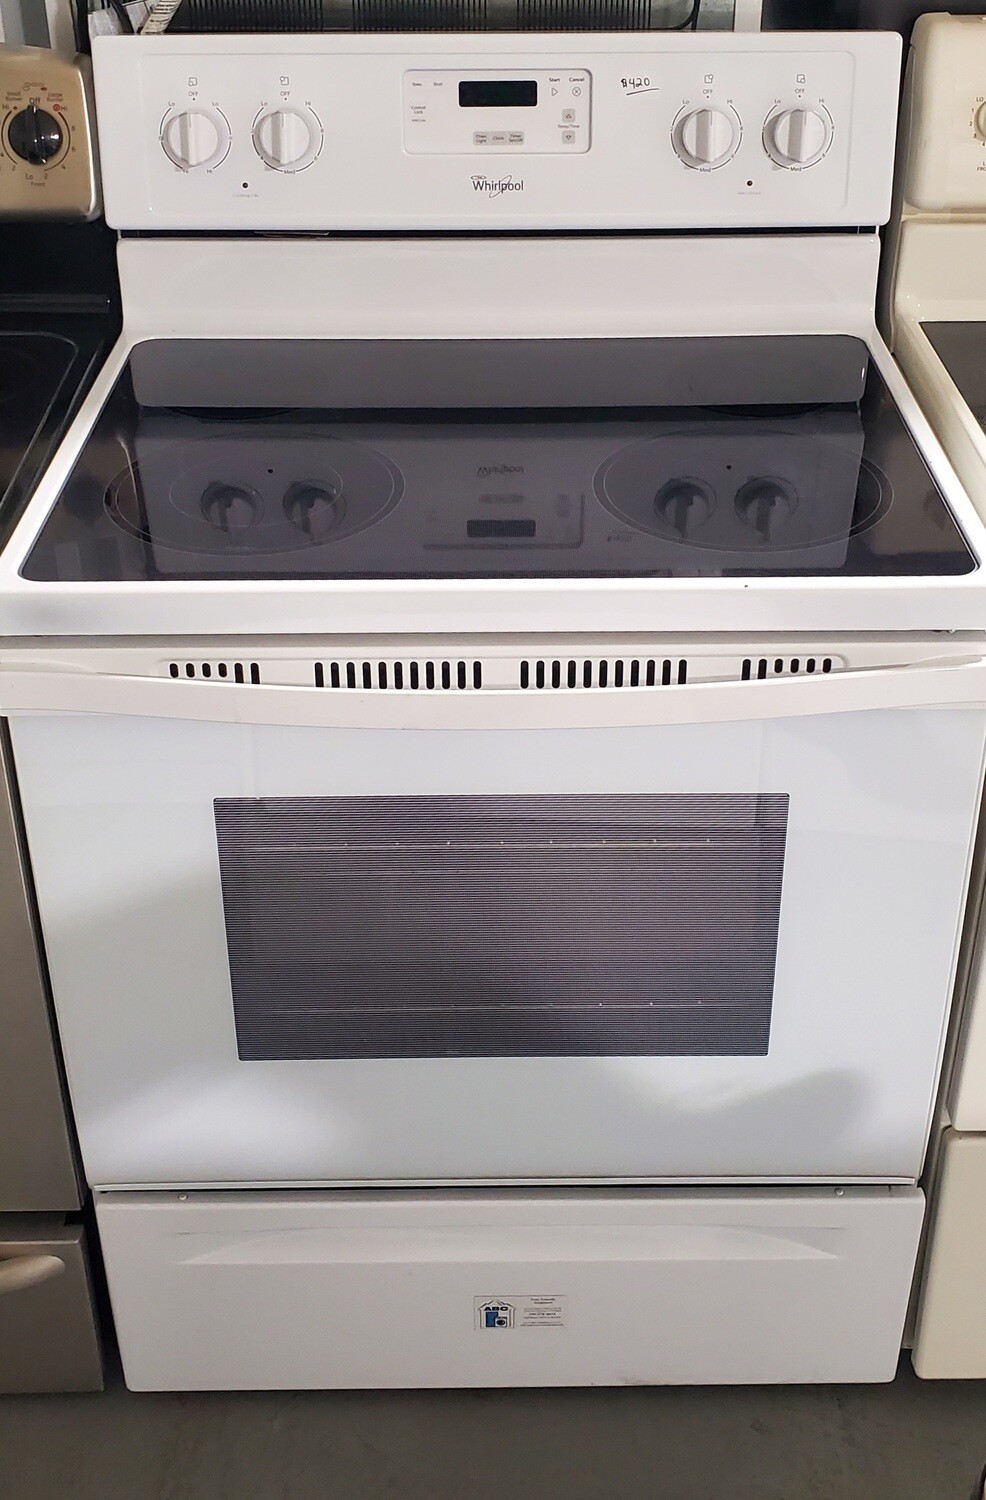 30in. Whirlpool Smoothtop Range Stove Oven Electric 4 Burner Model - Install Included!